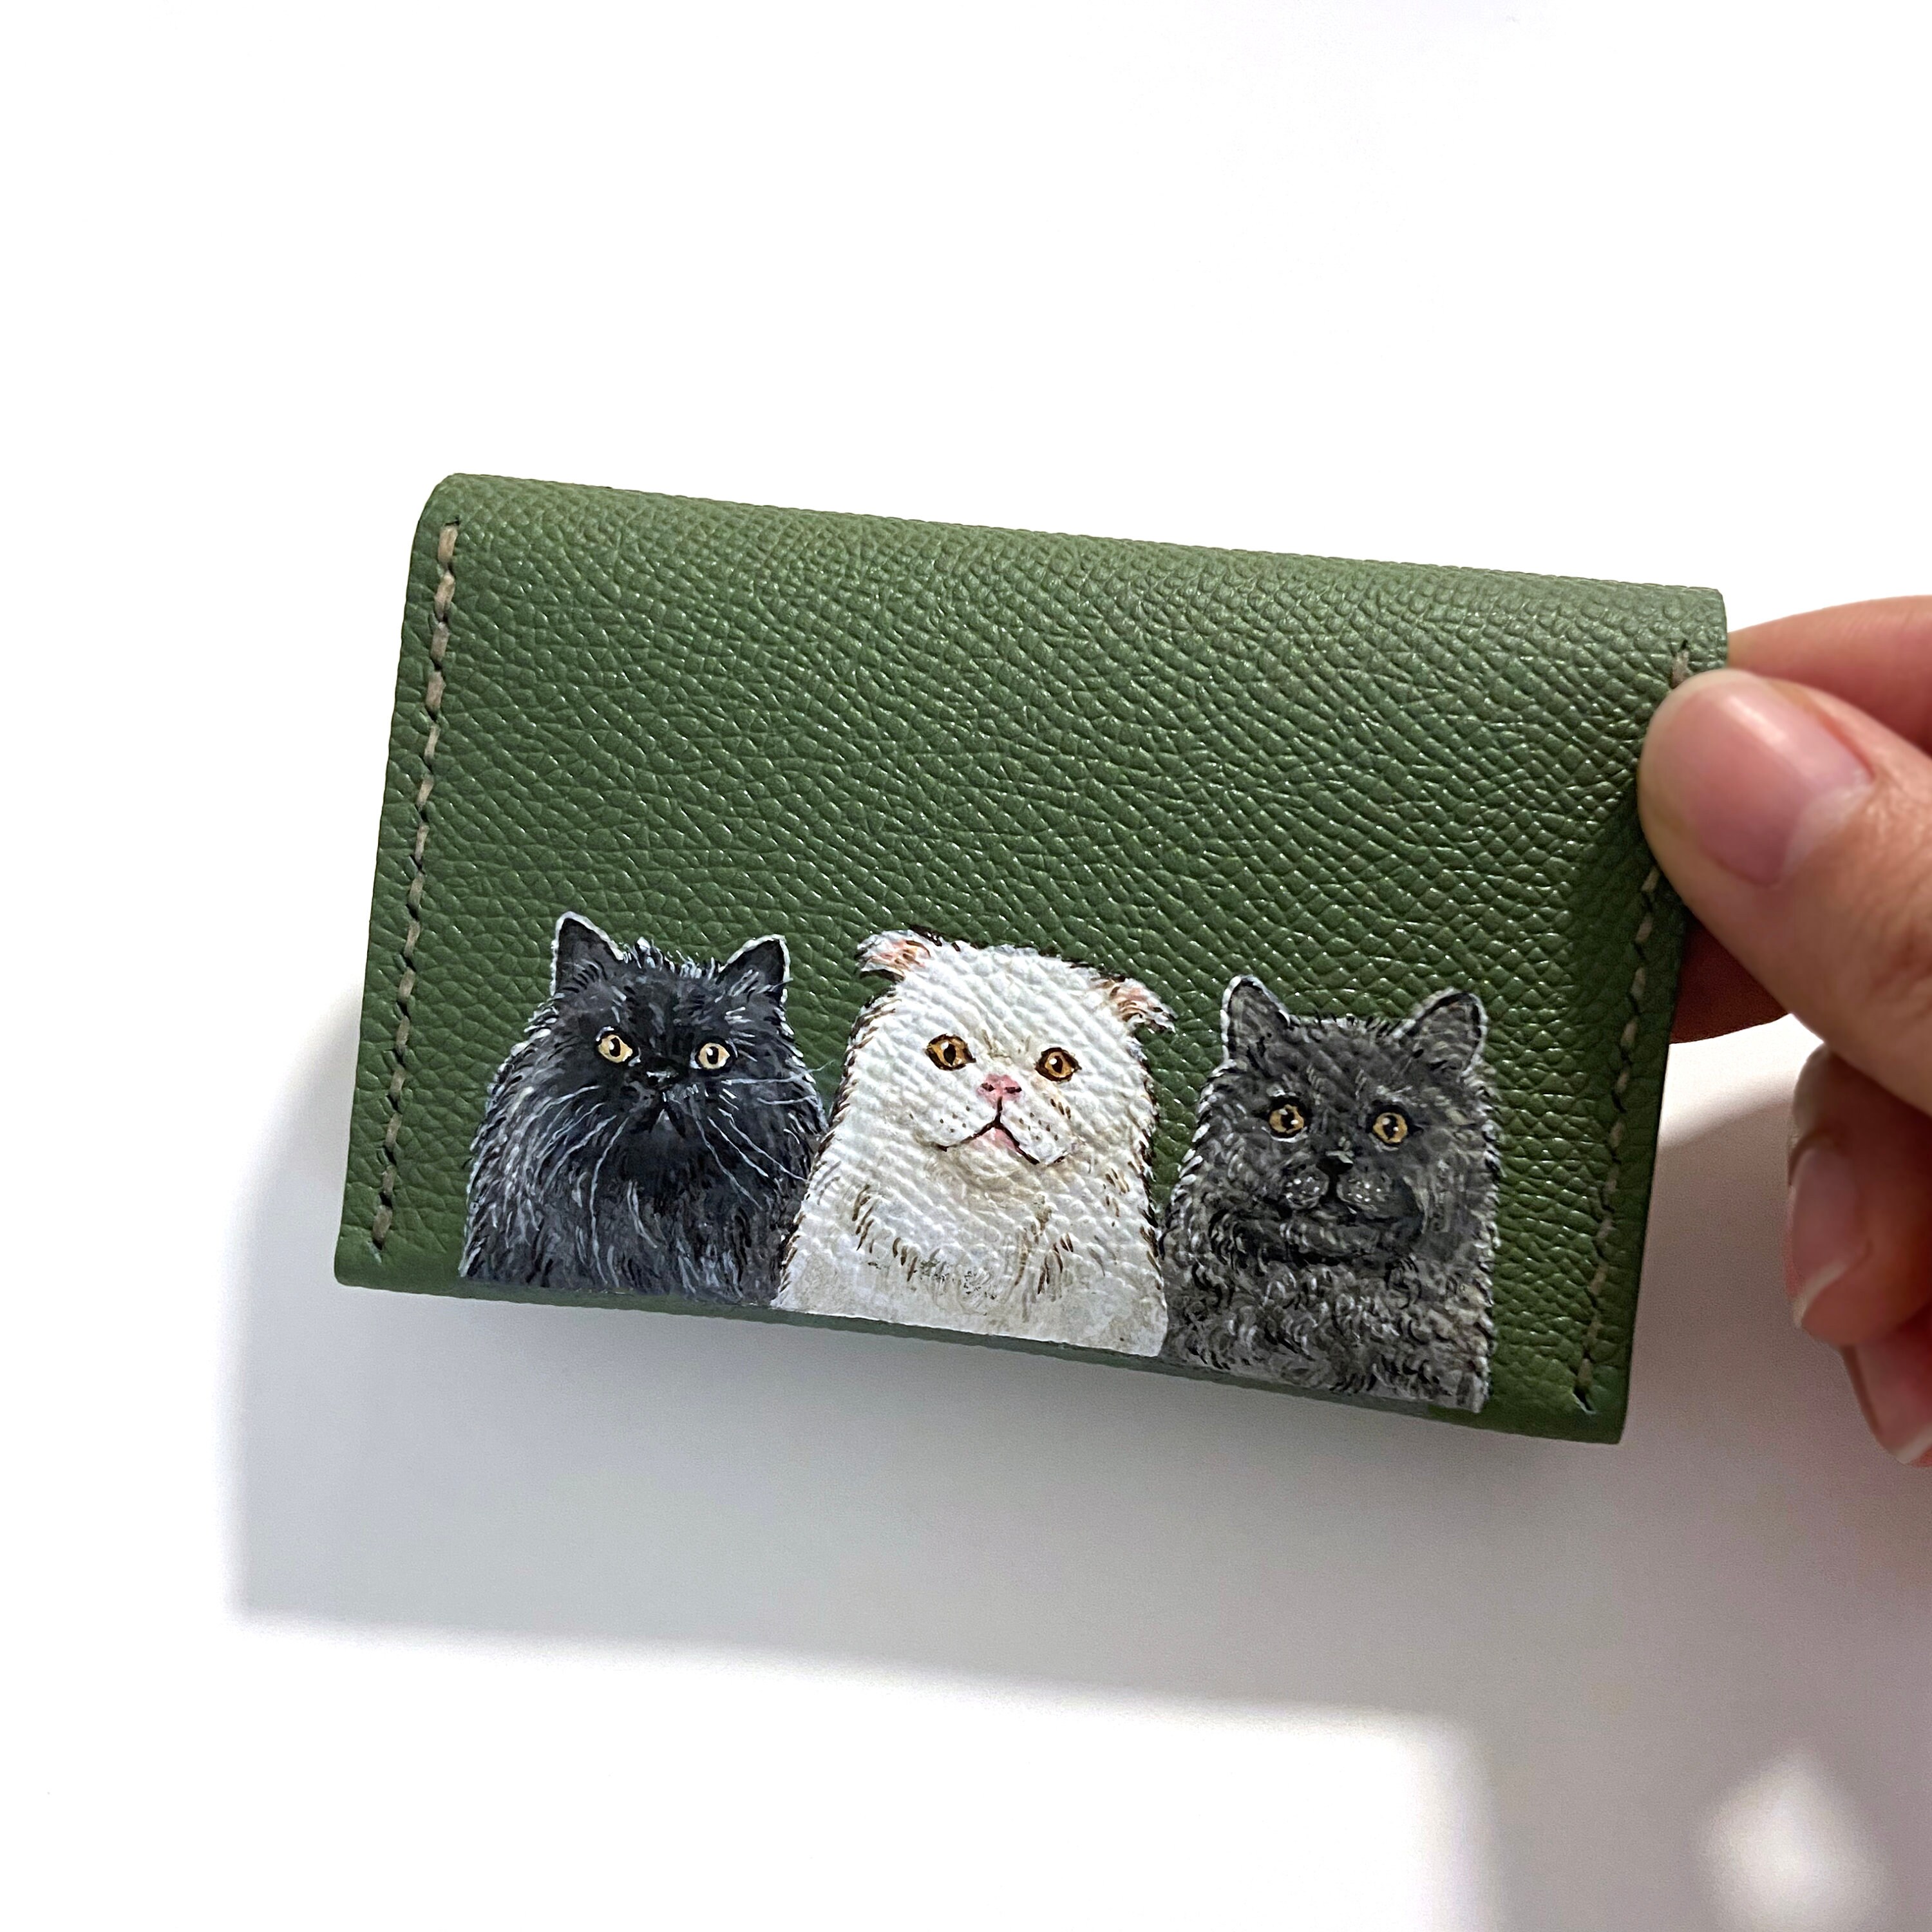 Buy Custom Made Pet Portrait Wallets, made to order from Saxon Leather art